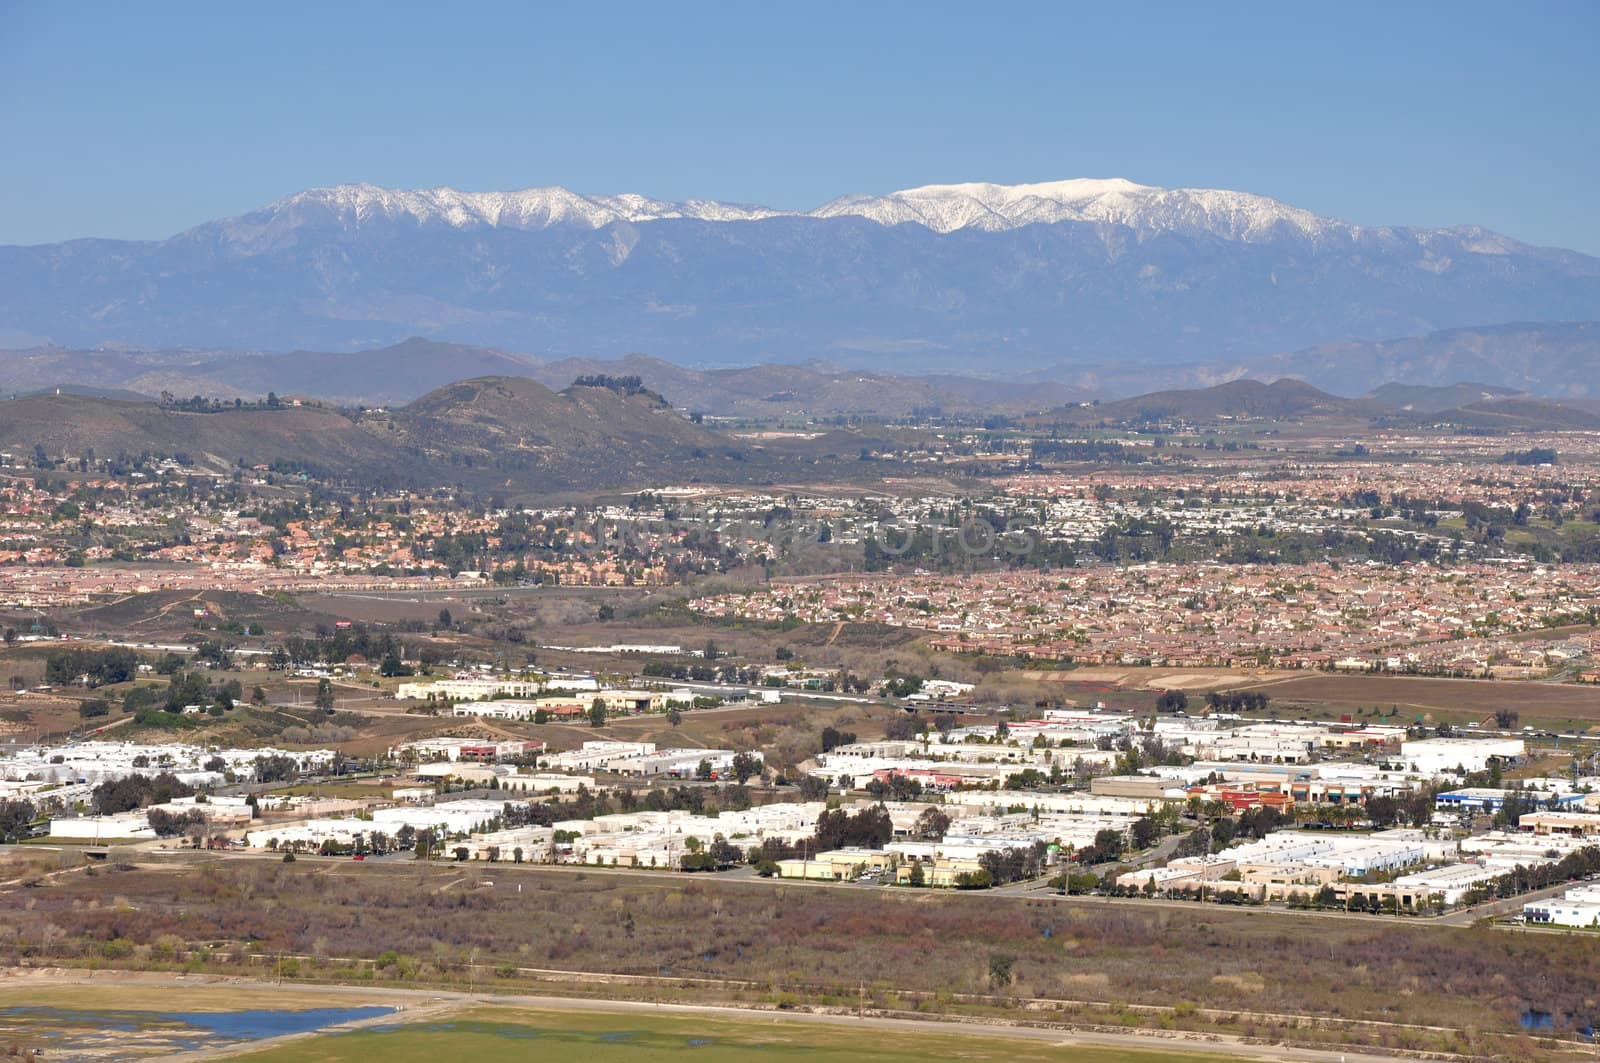 View of Murrieta, California with snow-capped Mount San Gorgonio in the distance.